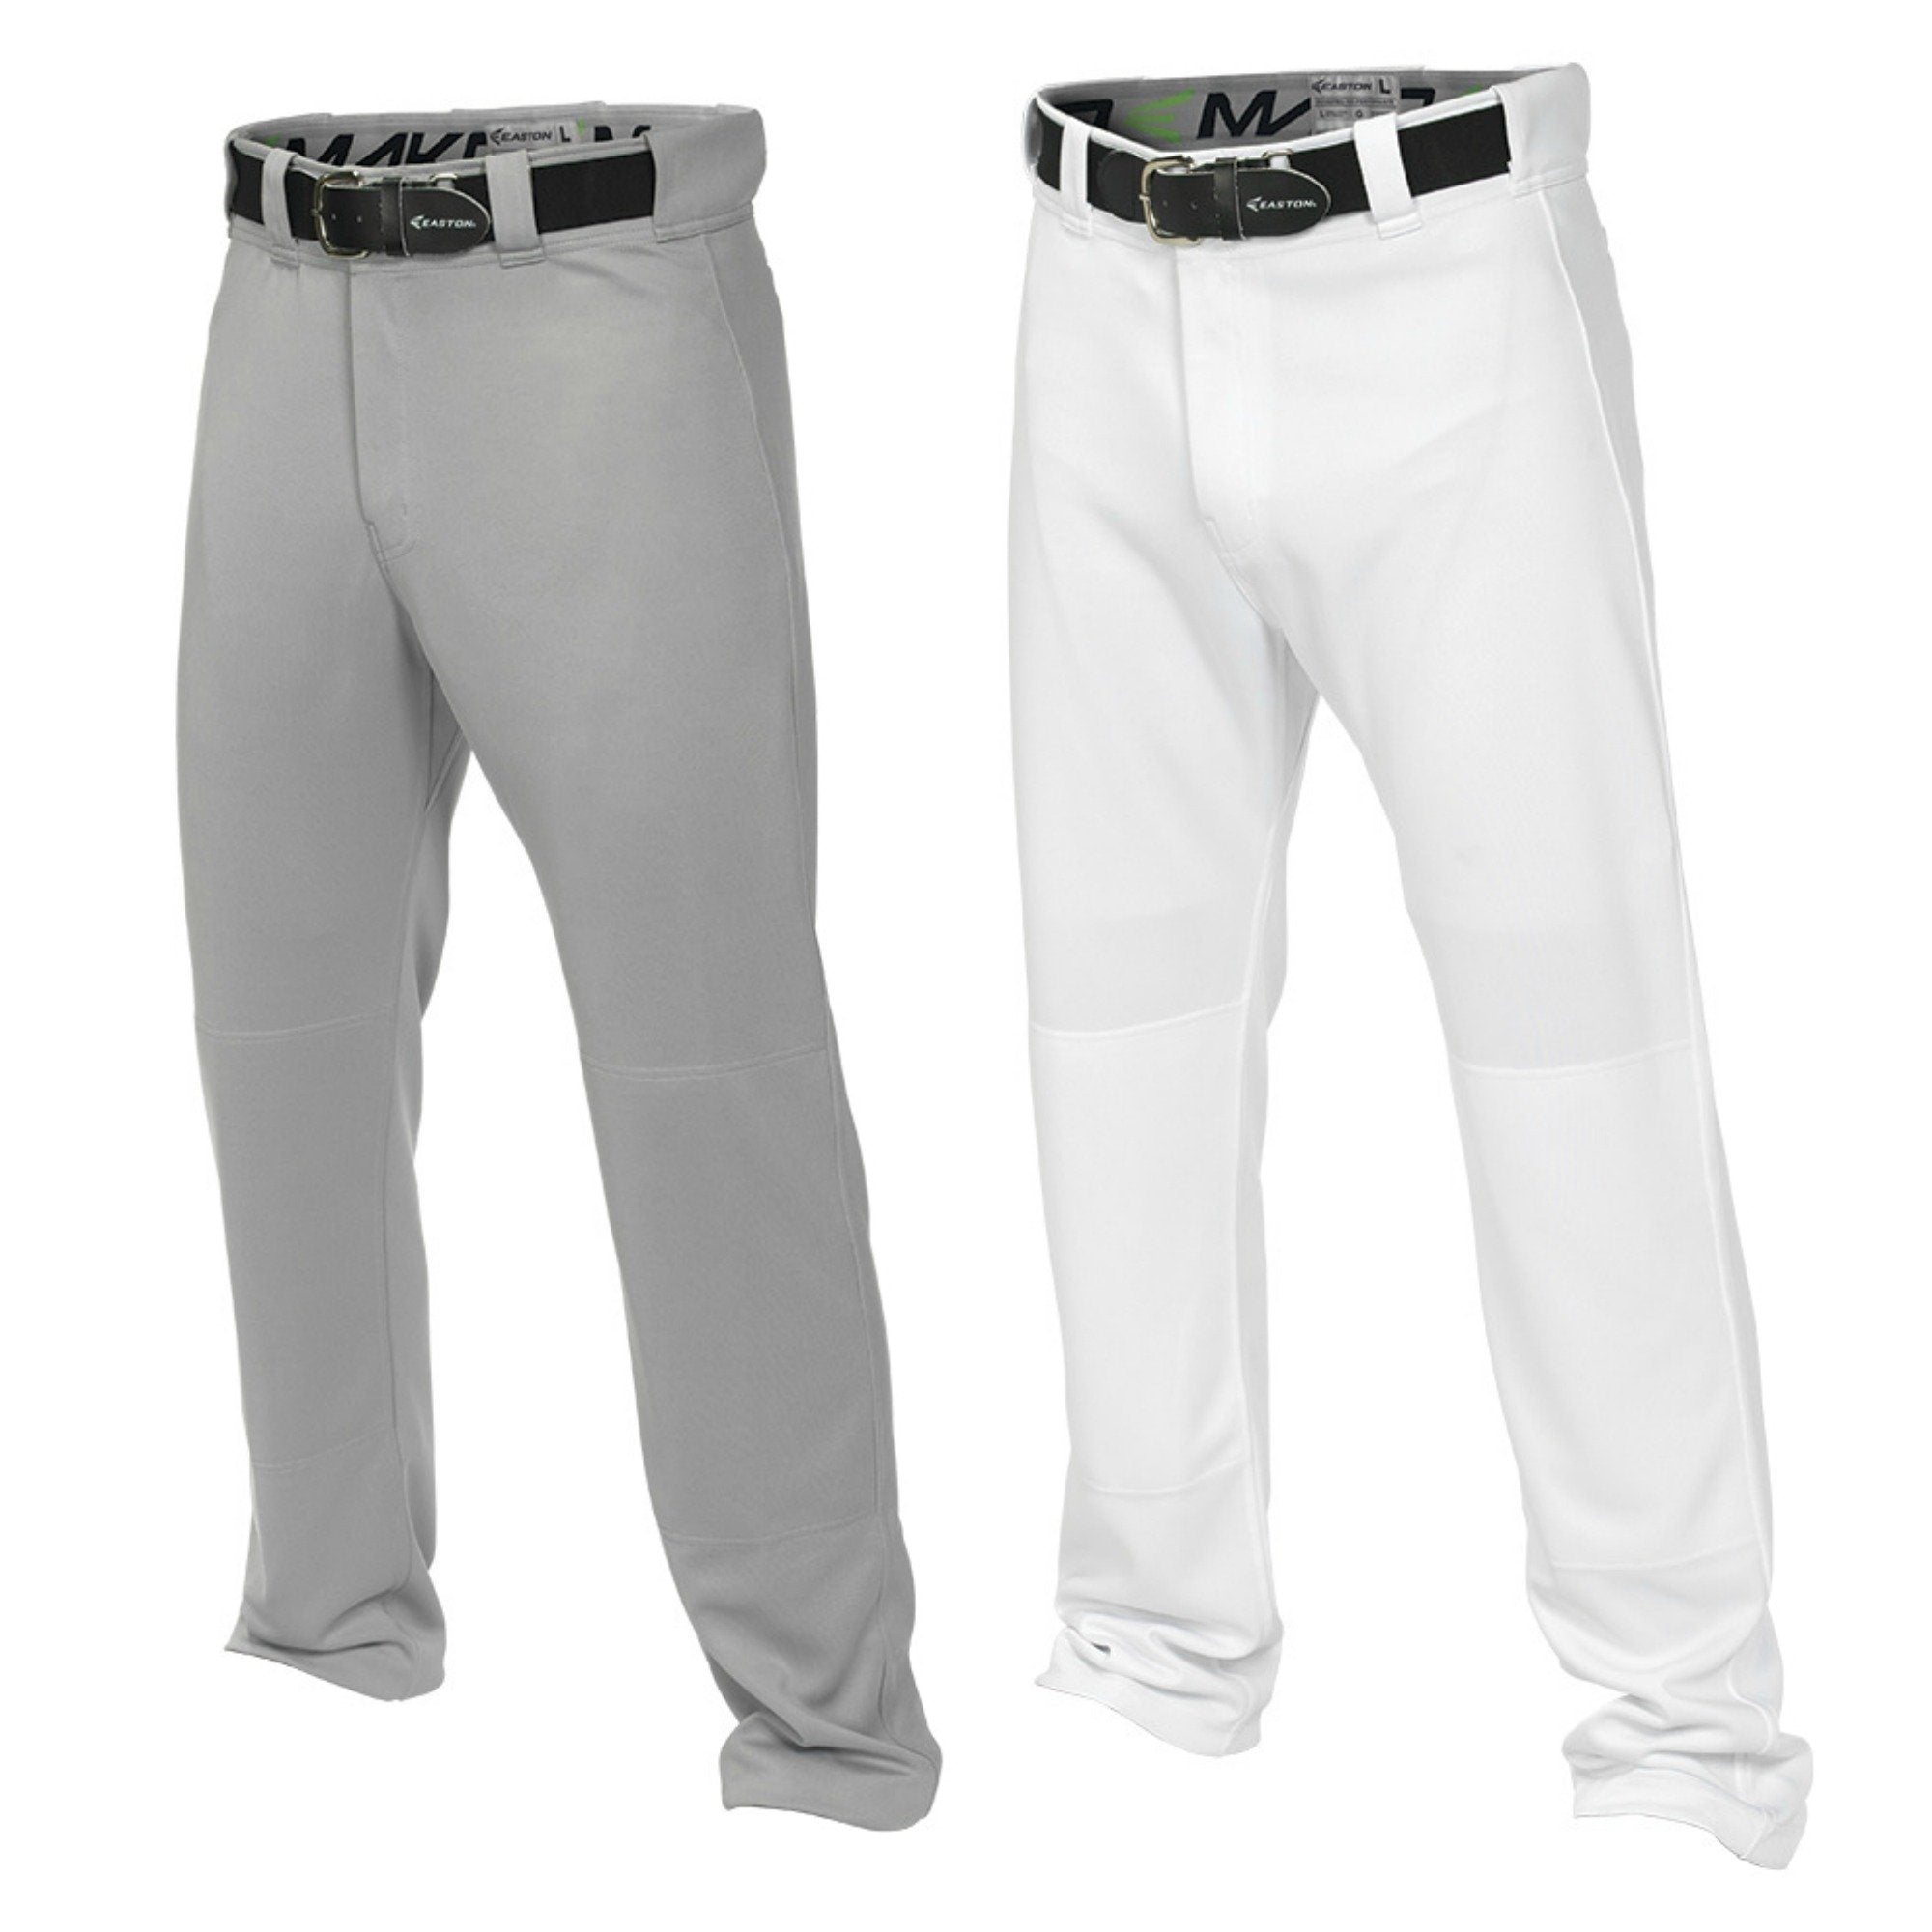 Easton Youth Solid Mako 2 Pant: A167108